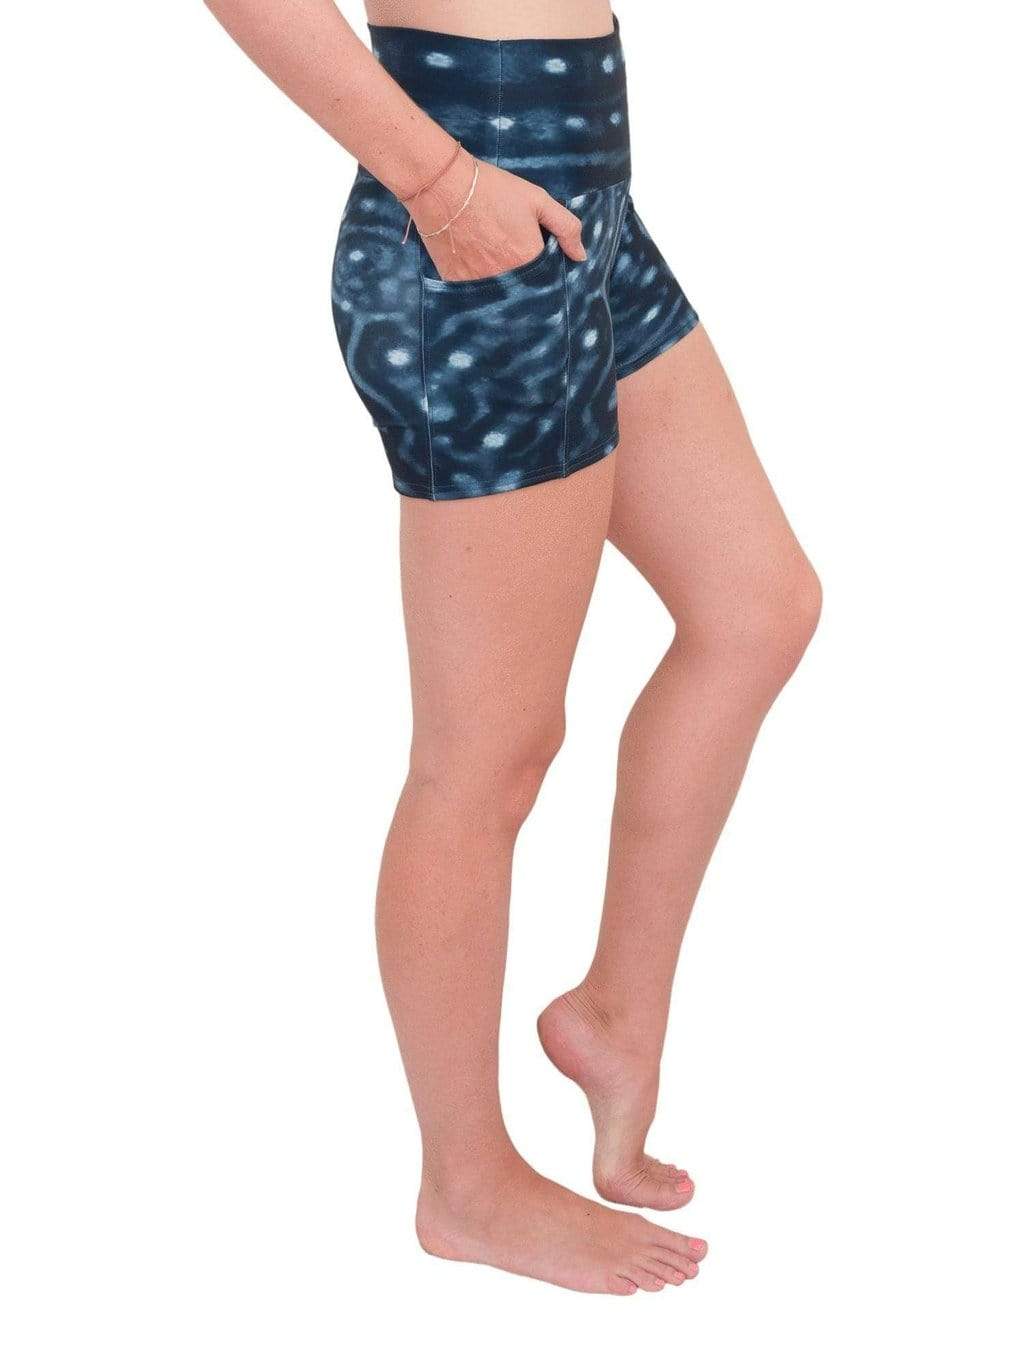 Model: Laura is our Chief Product Officer at Waterlust, a scuba diver, kiter and recreational yogi. She is 5’10, 147 lbs, 34B and is wearing a size M short.